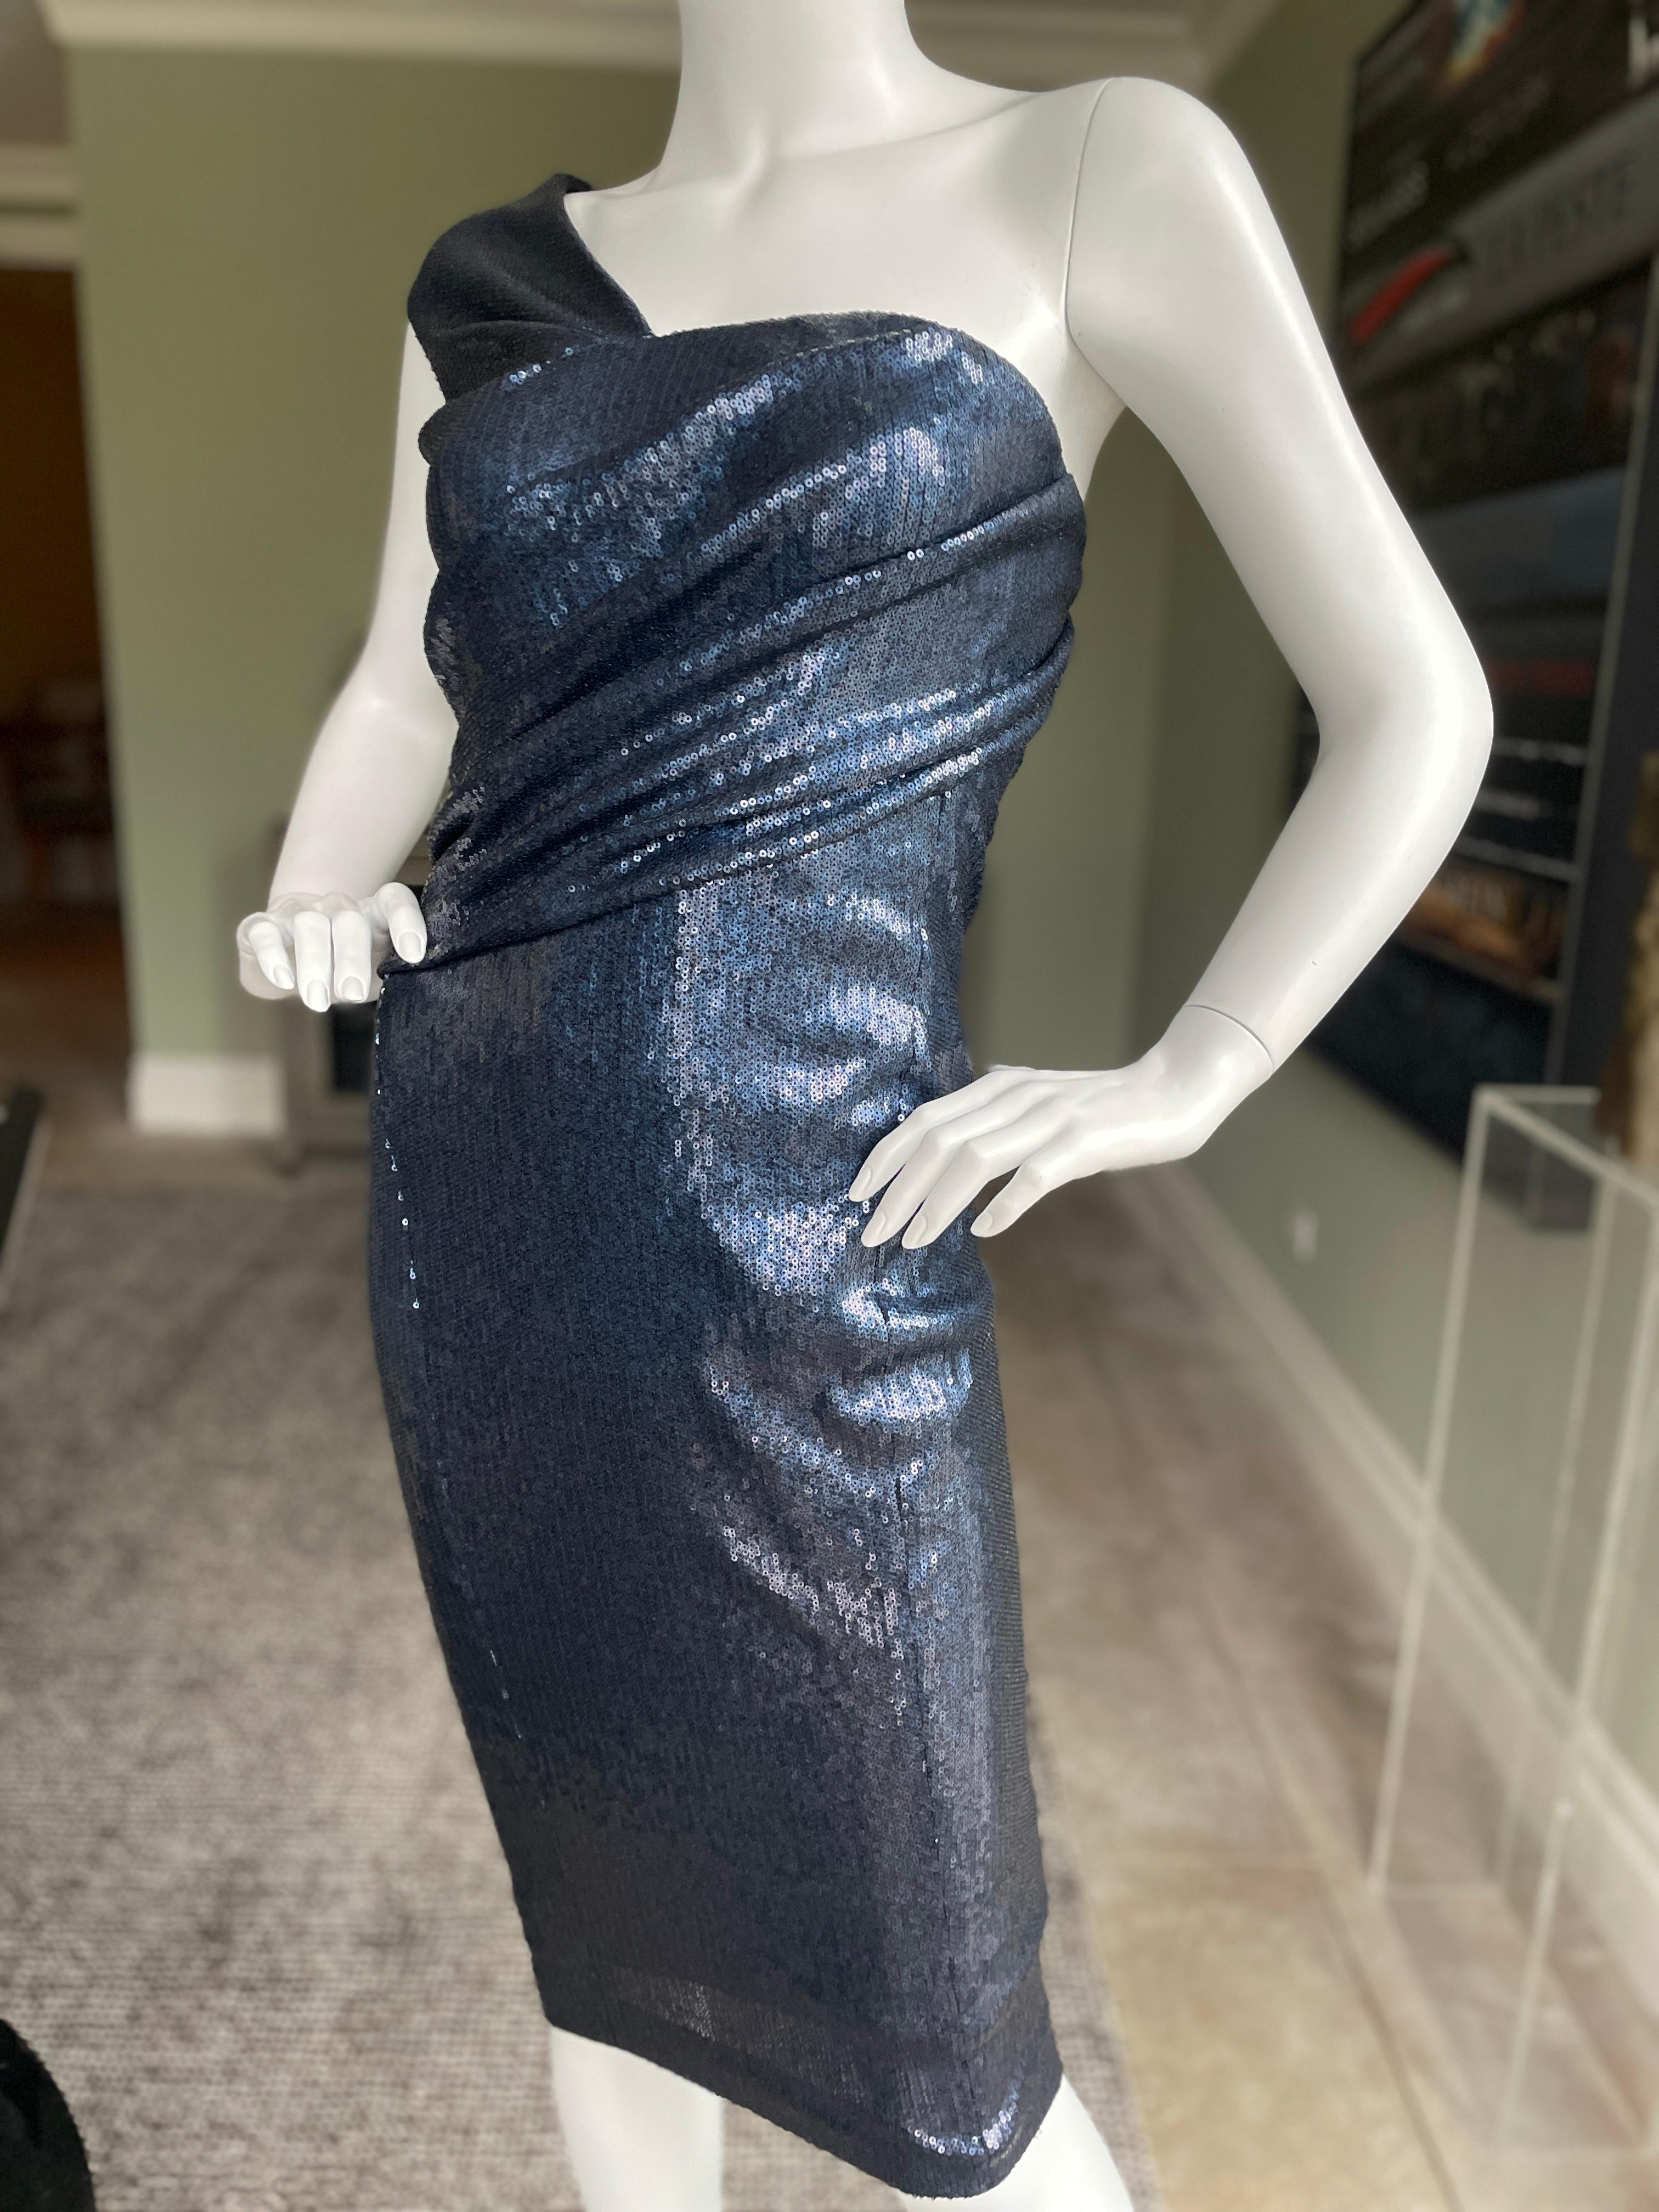 Donna Karan Vintage Navy Blue Sequin One Shoulder Cocktail Dress
  This is so pretty. There is a lot of stretch.
Size 4
 Bust 34